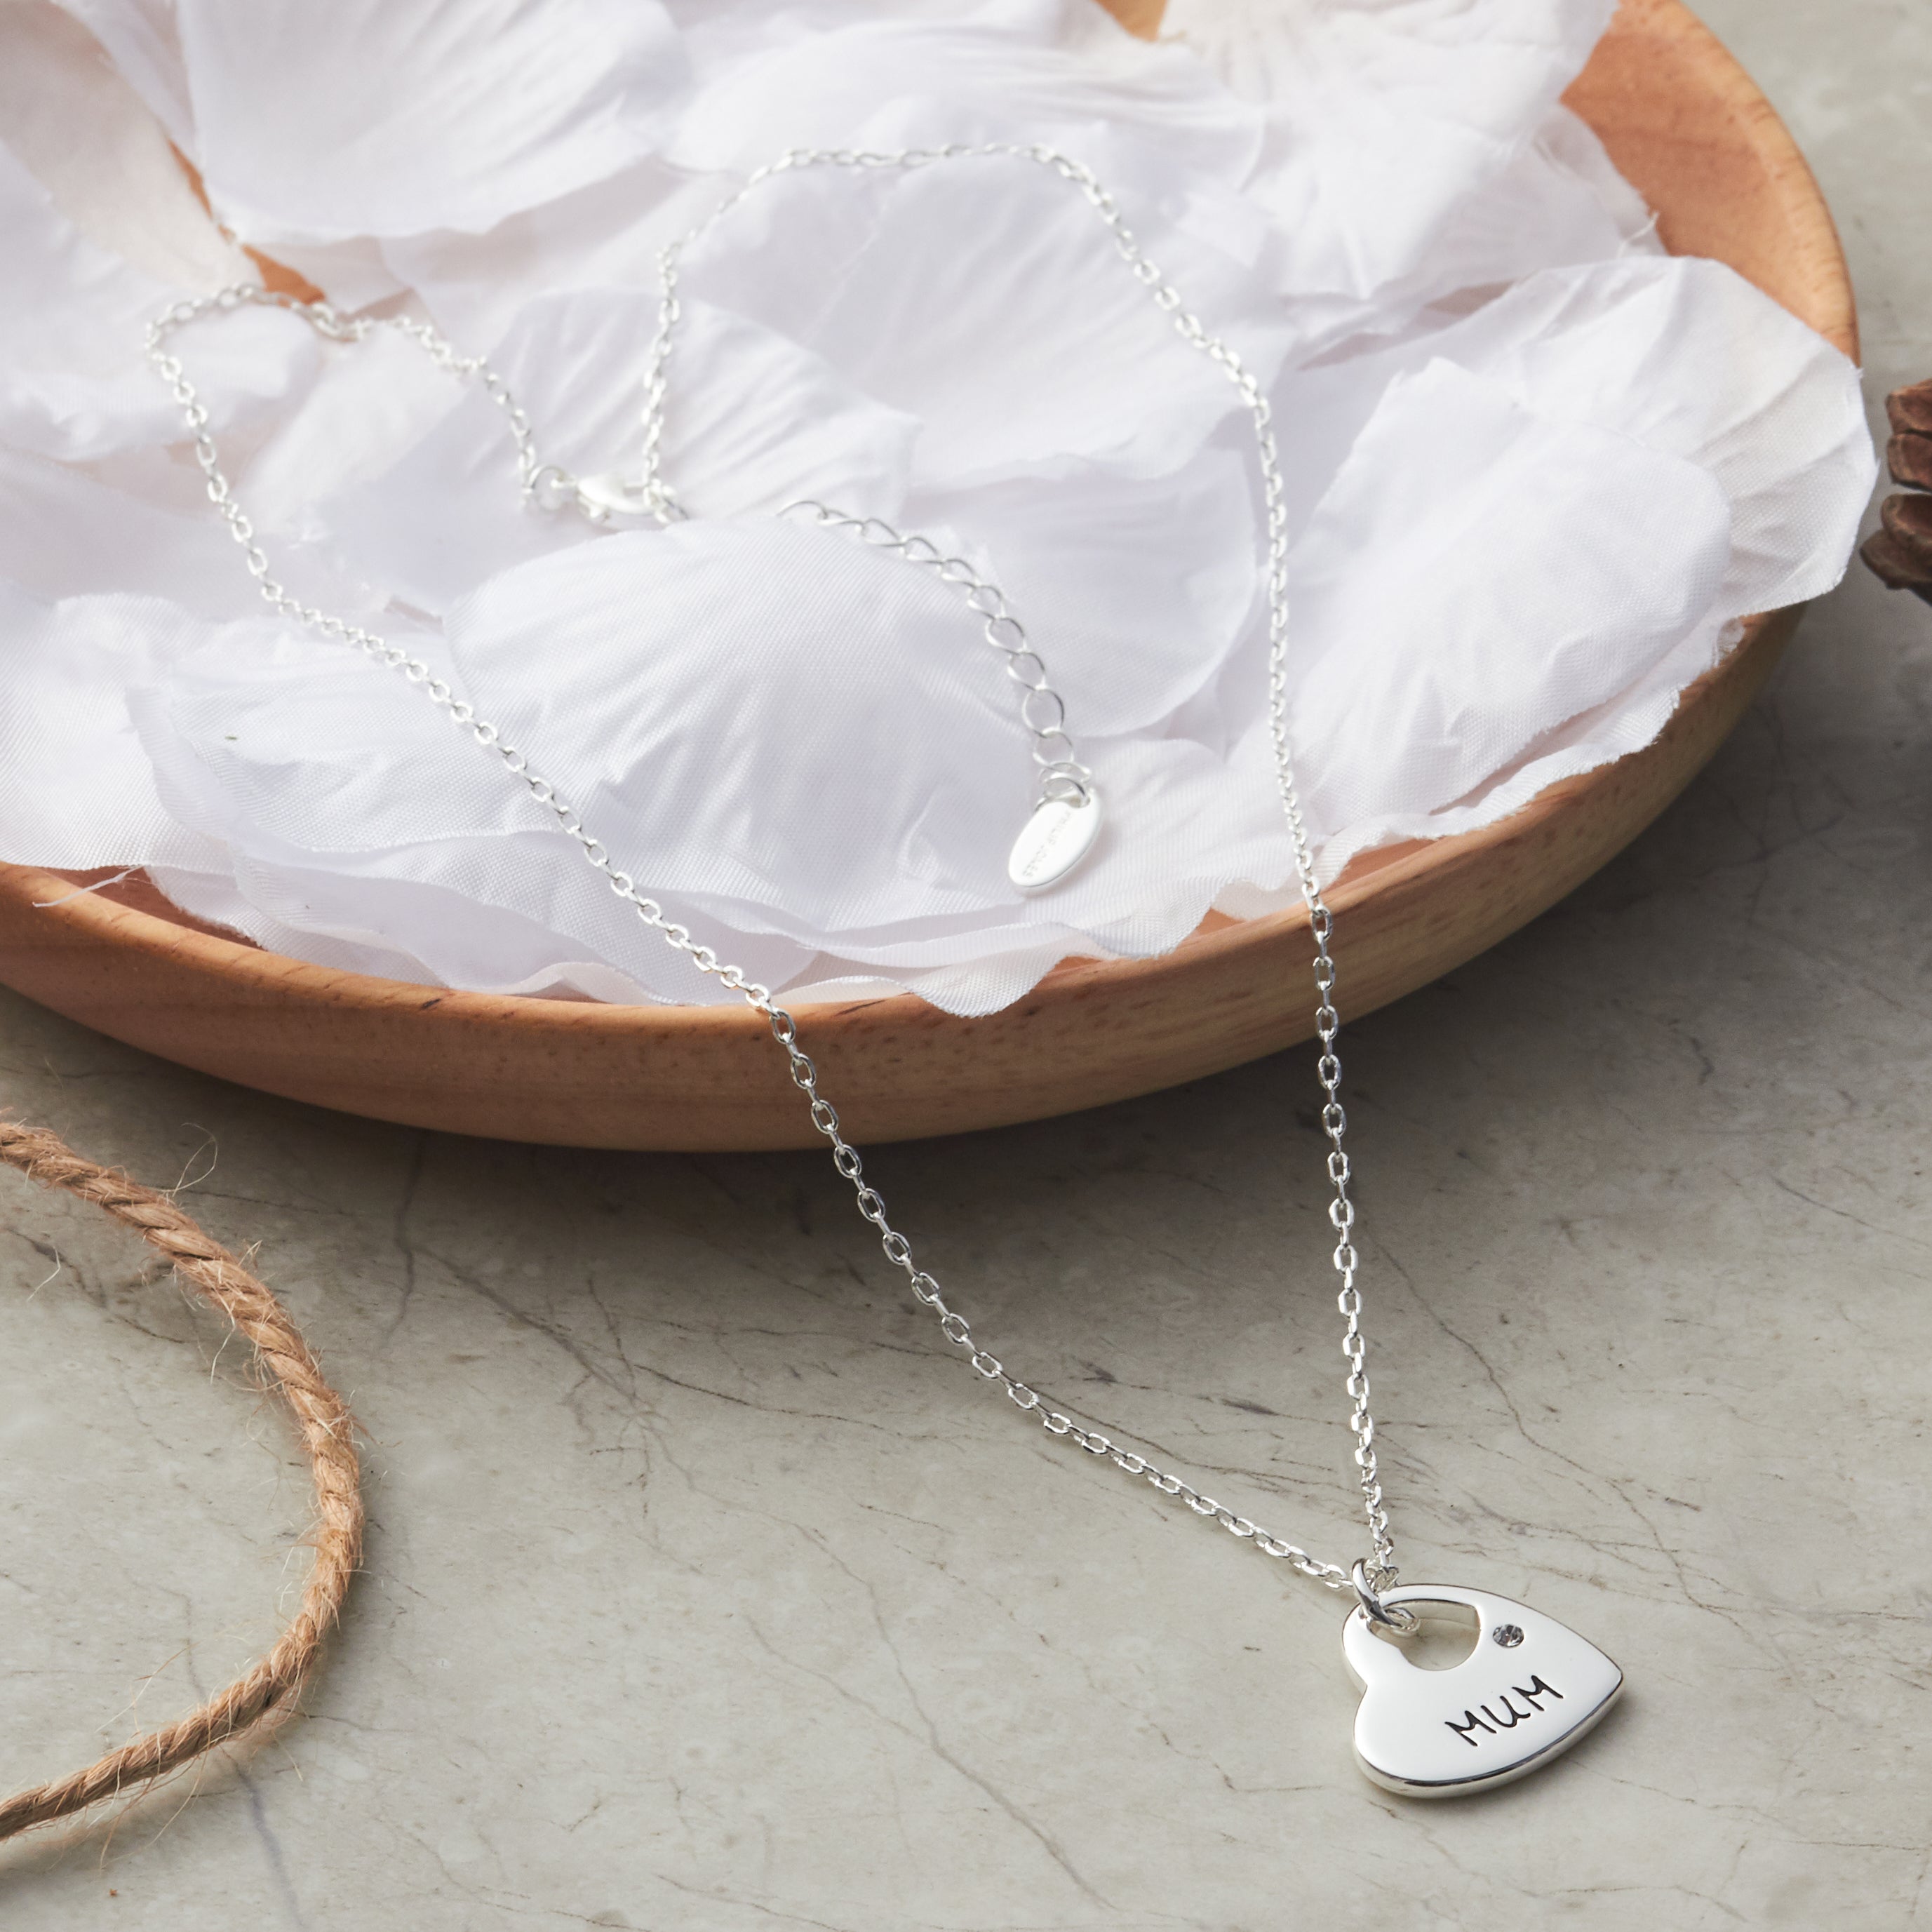 Mum Heart Necklace Created with Zircondia® Crystals